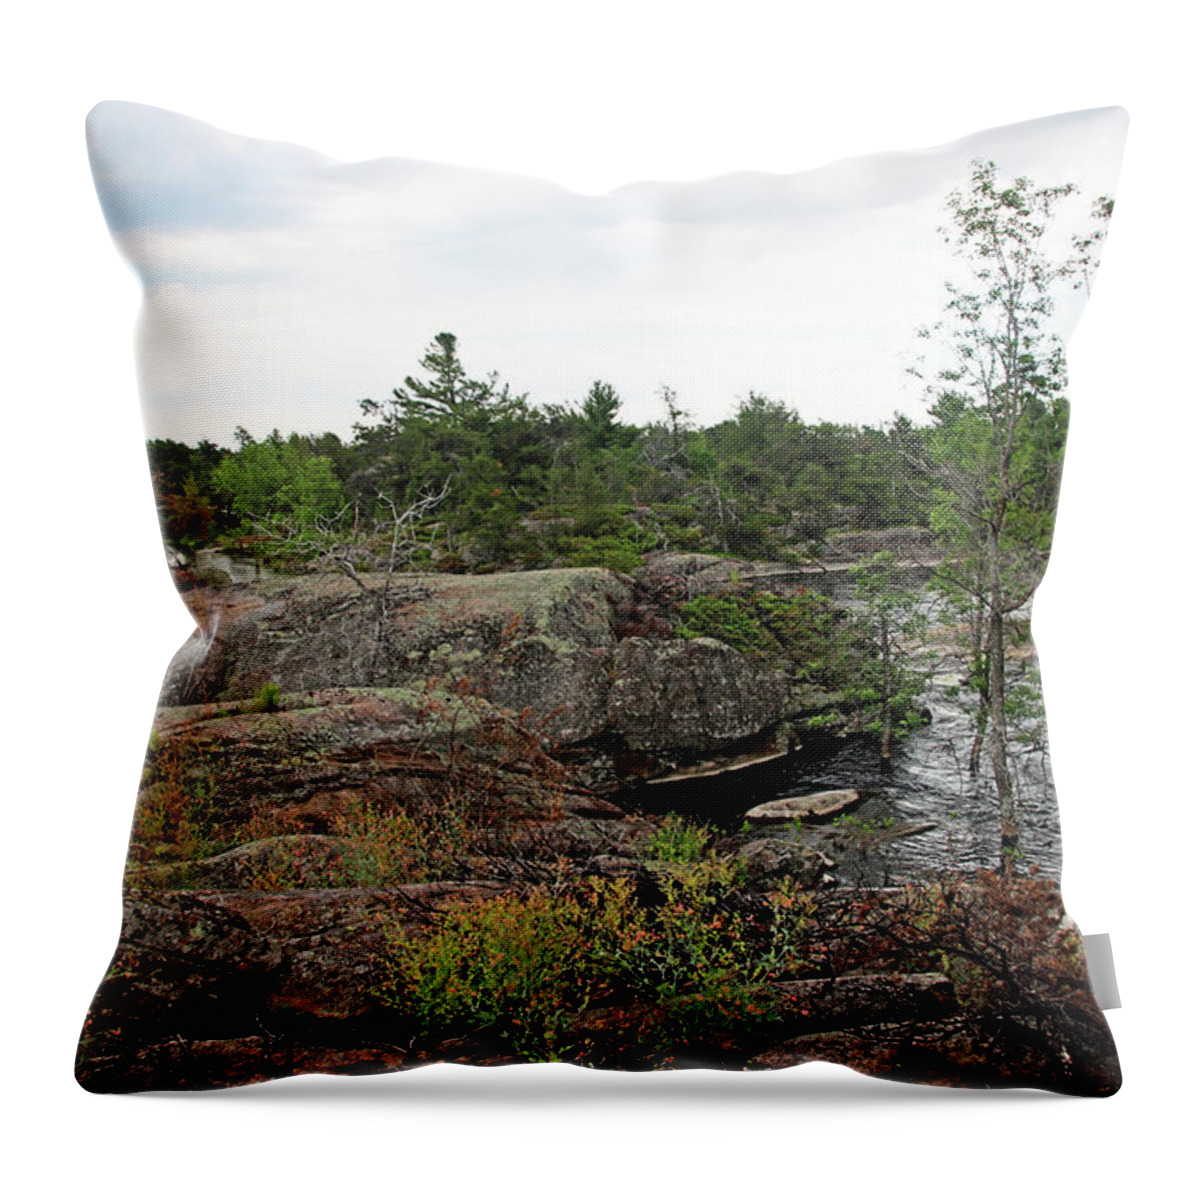 Pickerel River Throw Pillow featuring the photograph Pickerel River Outlet Top Of The Falls by Debbie Oppermann